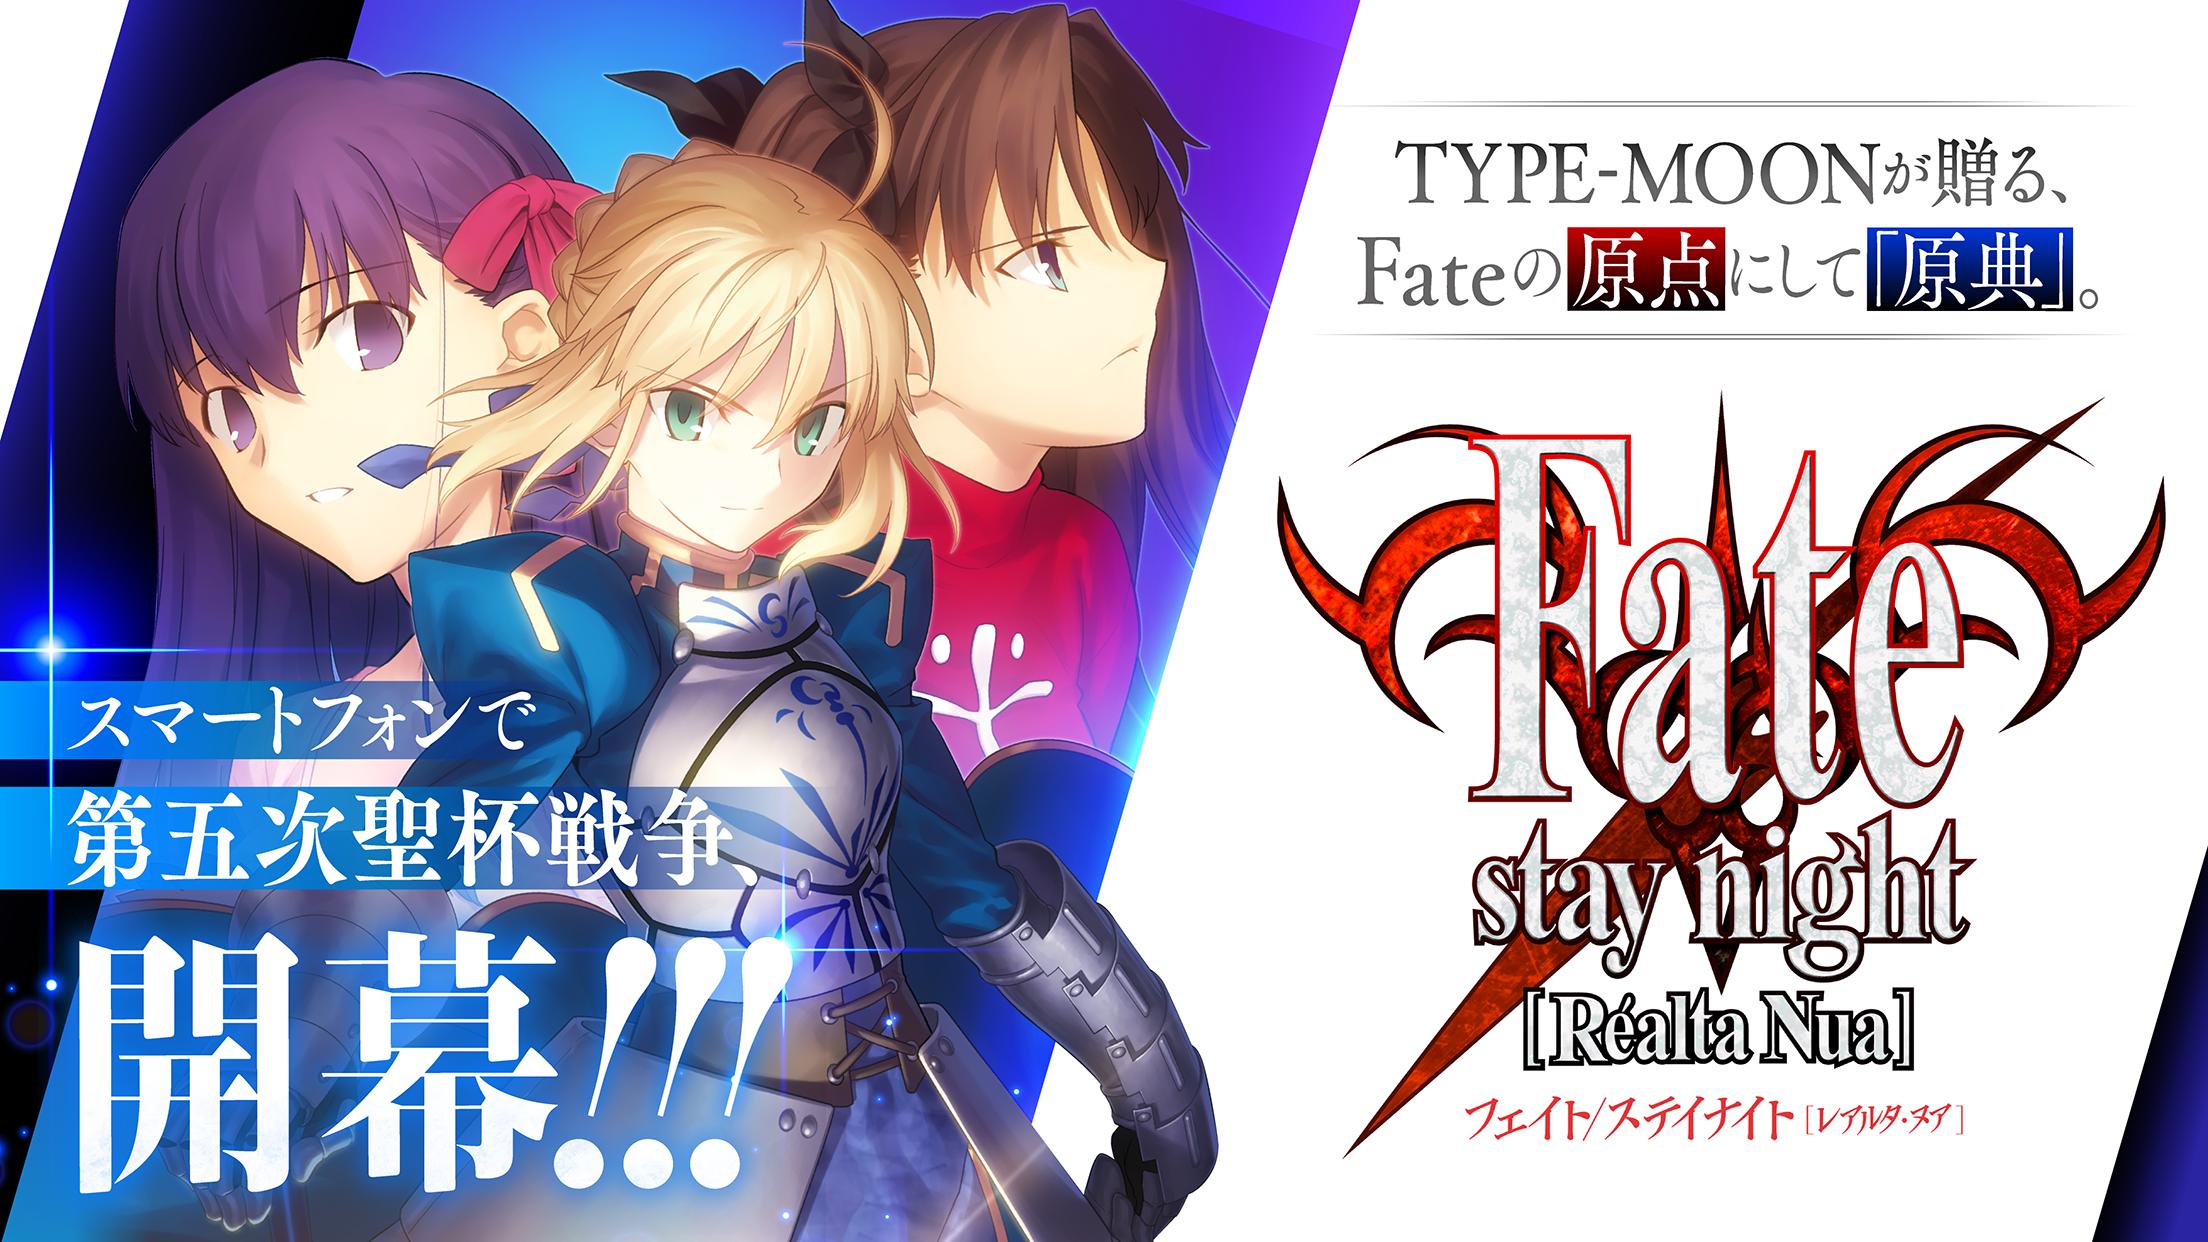 Fate Stay Night Realta Nua For Android Apk Download